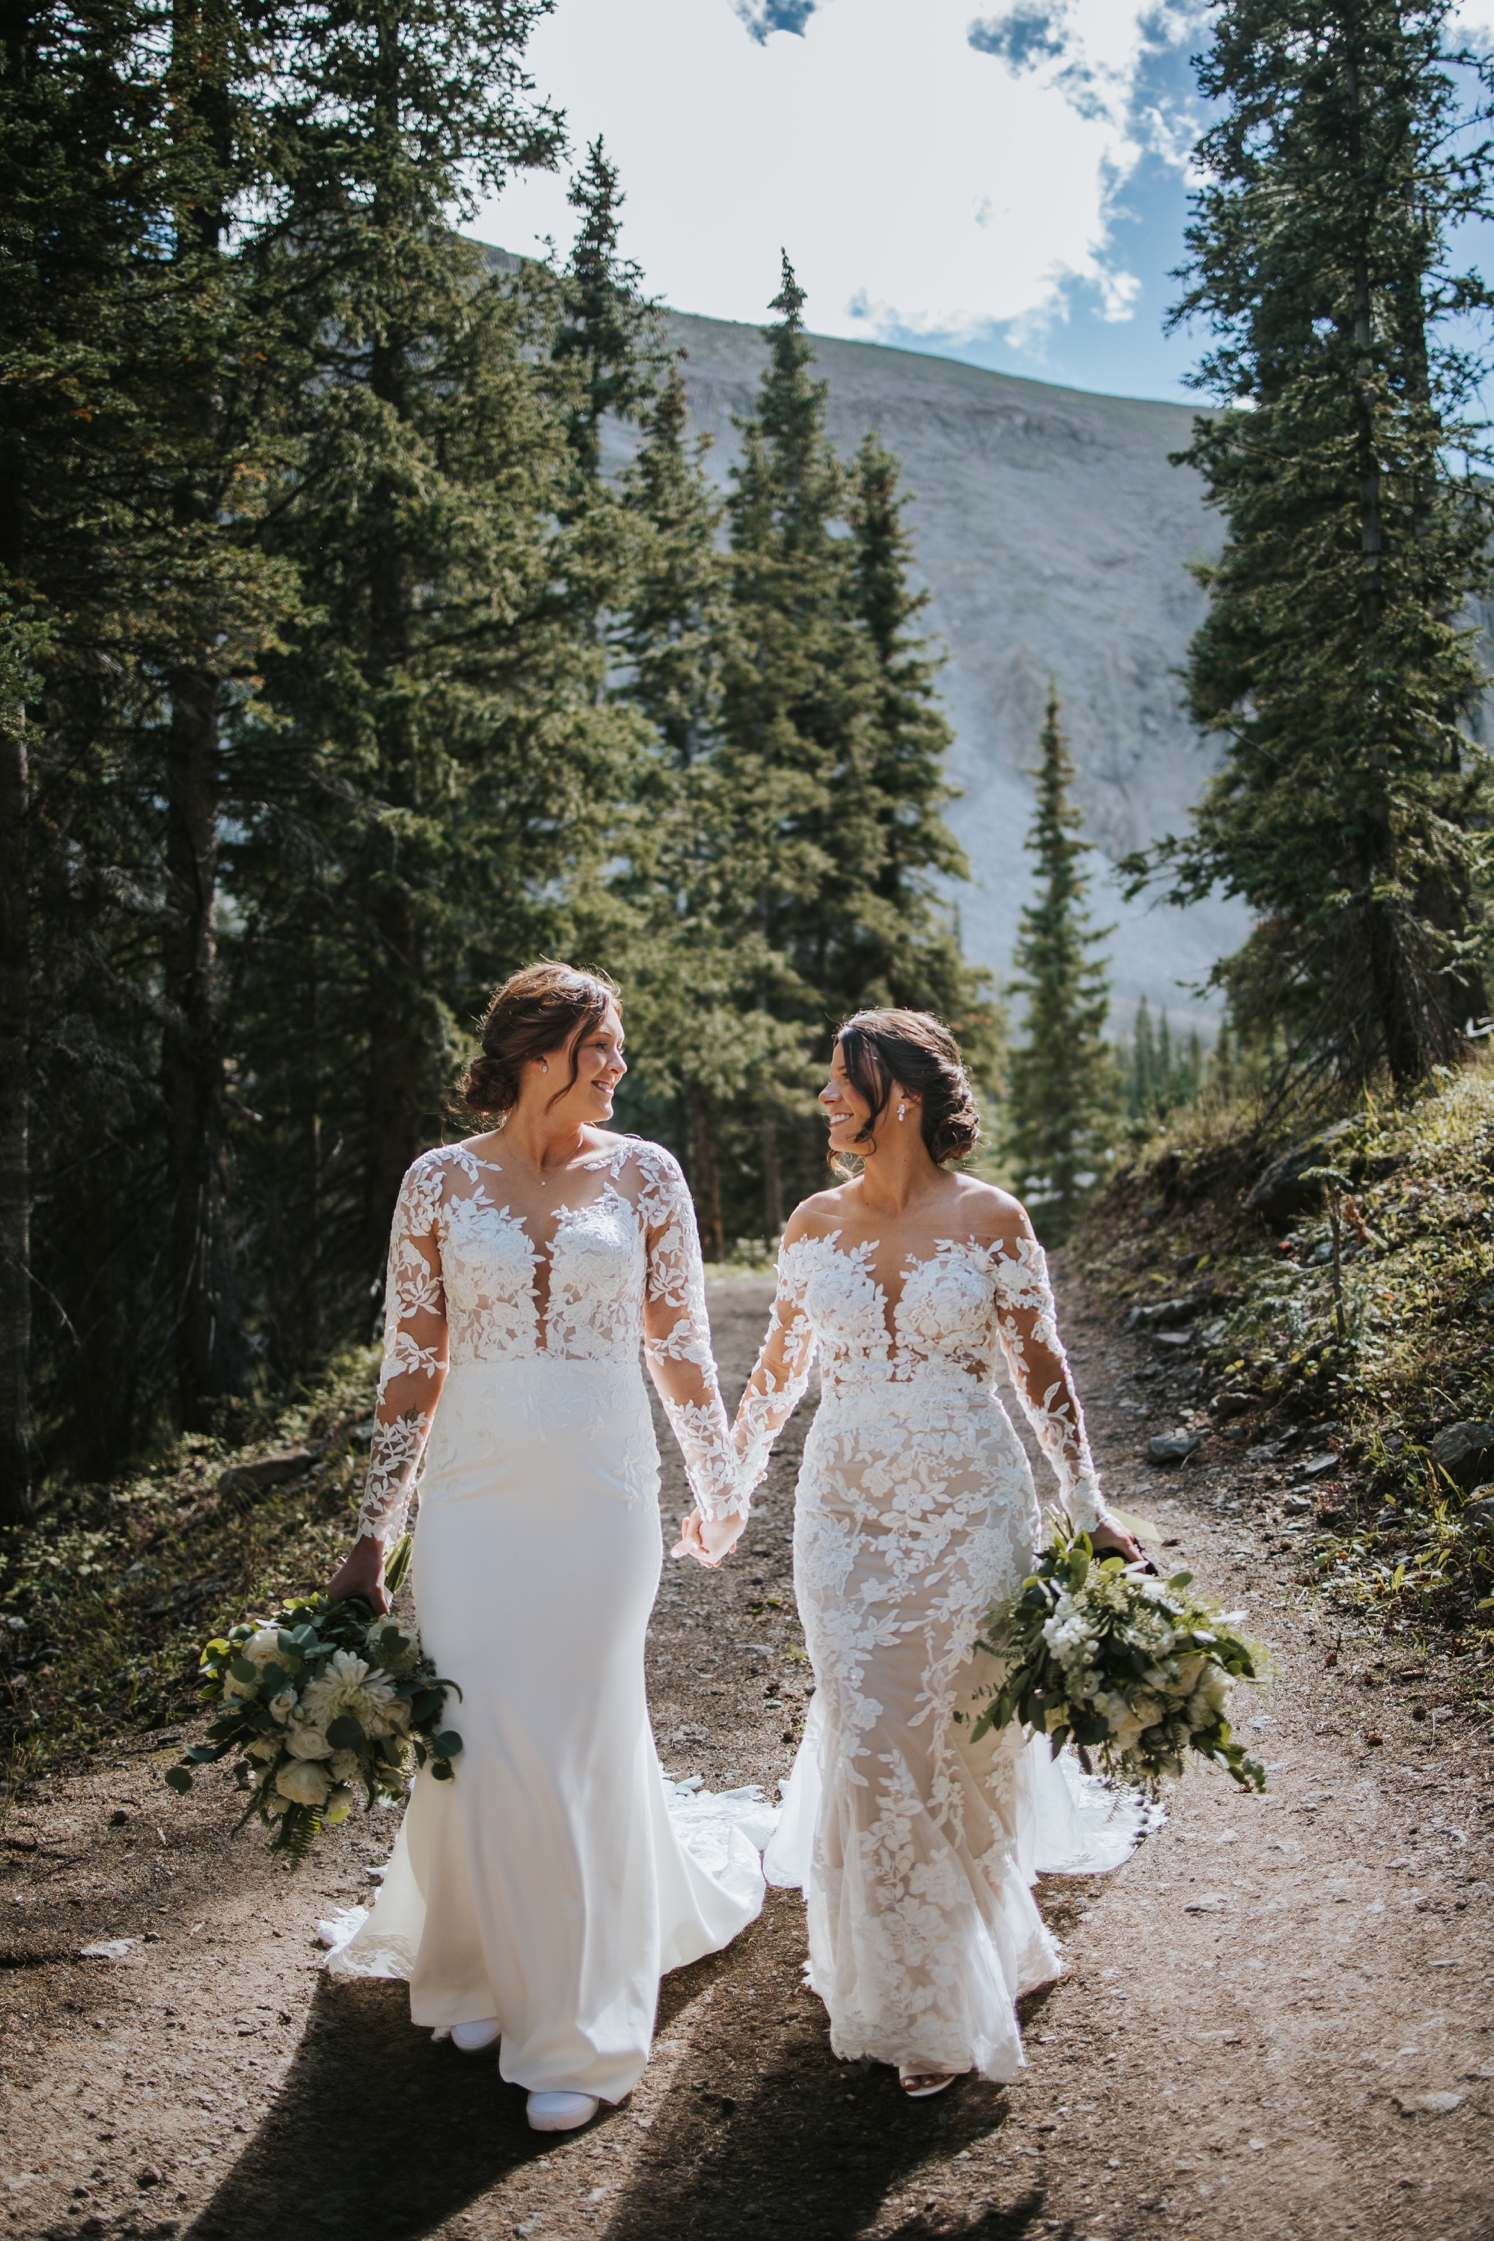 Brides holding hands and walking down dirt road after Telluride wedding | McArthur Weddings and Events